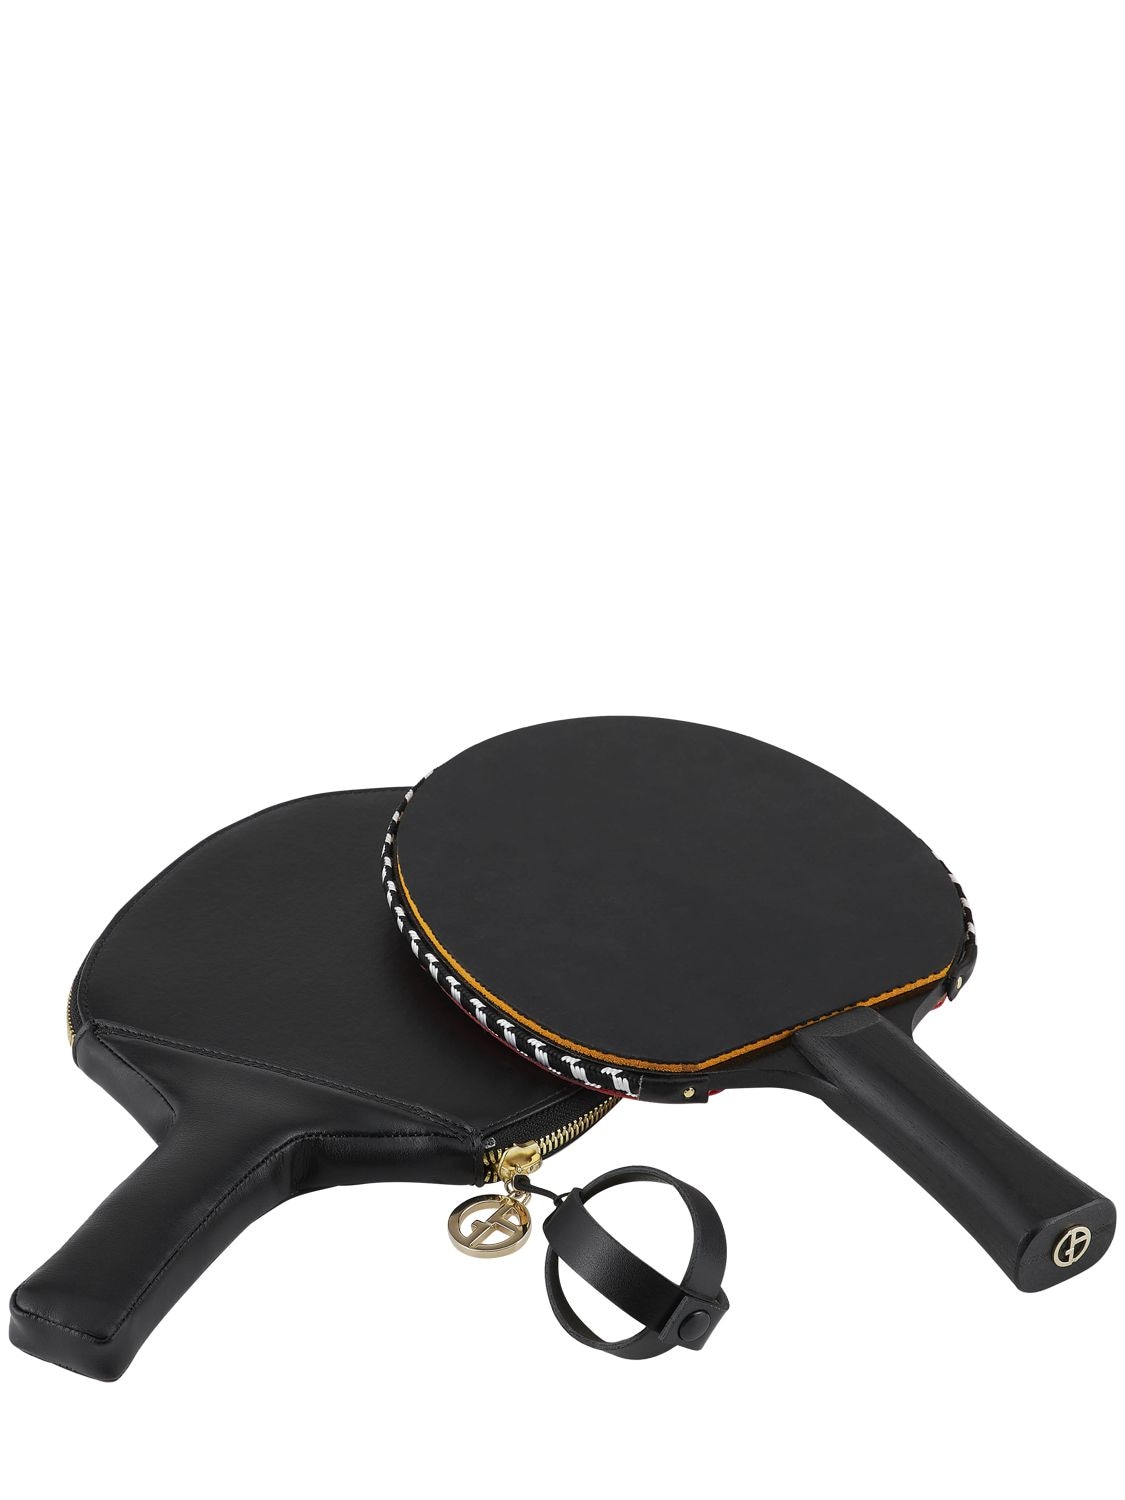 Plage Ping Pong Paddle